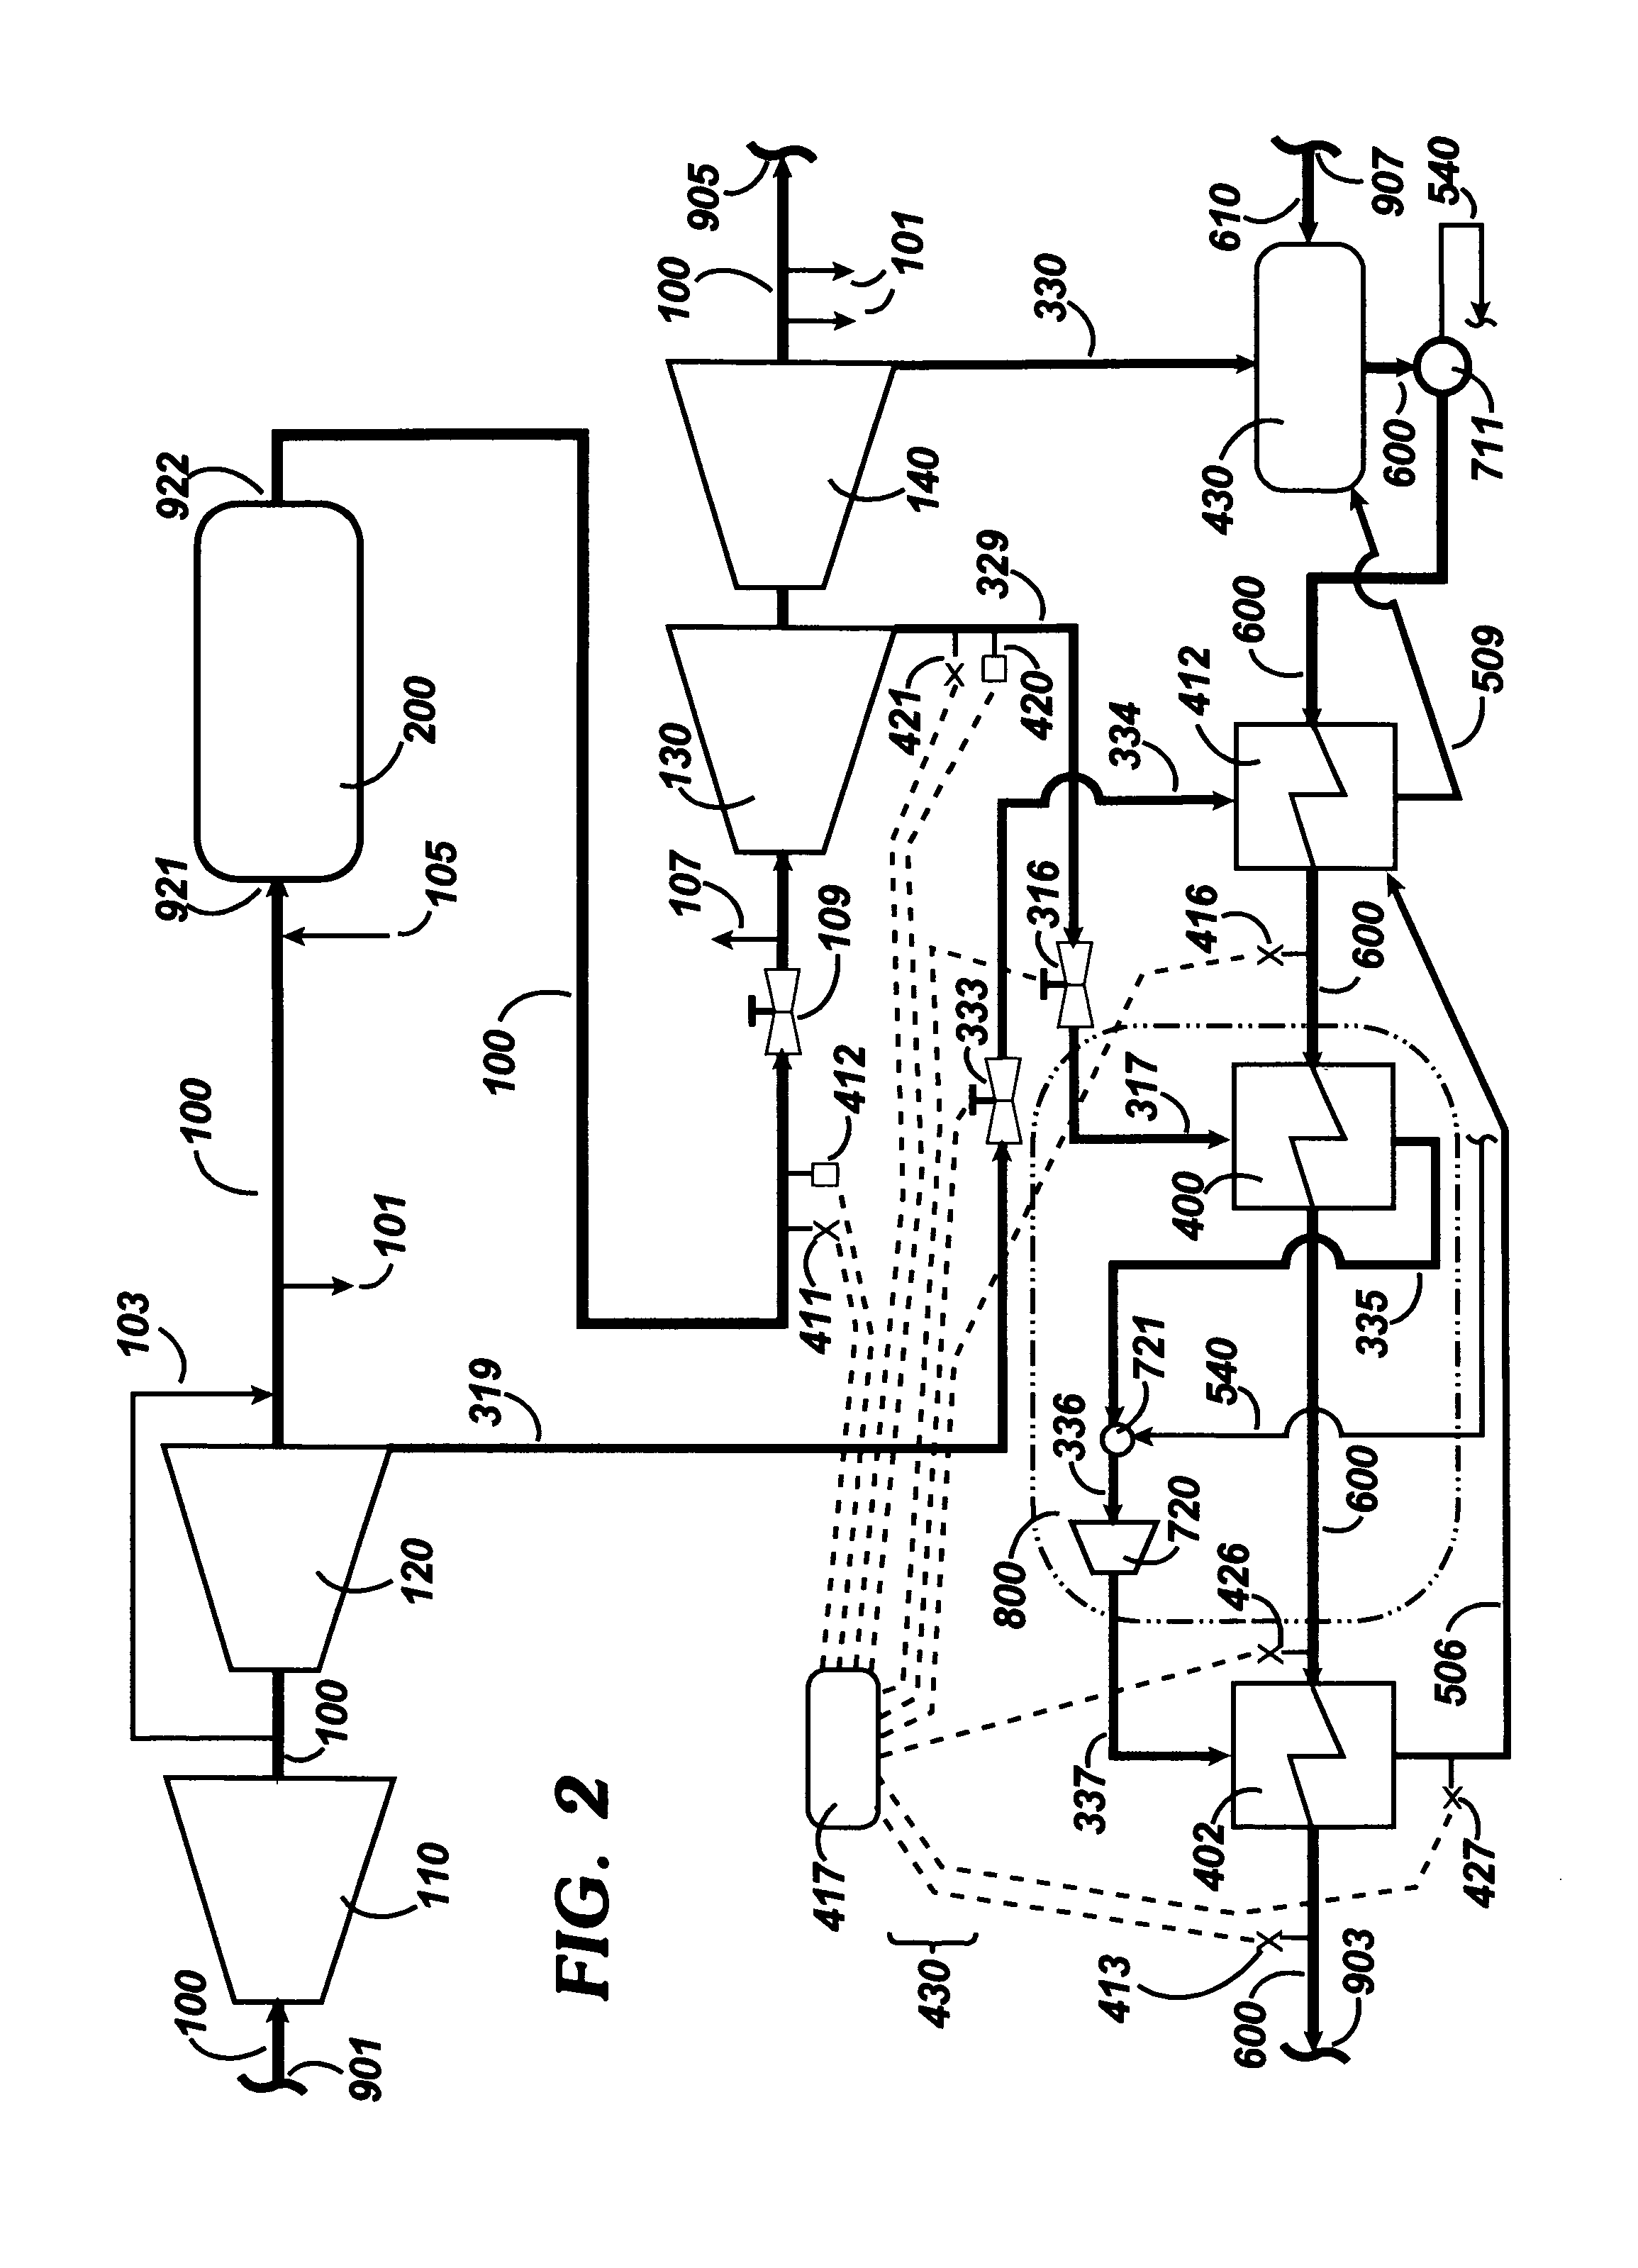 Method and apparatus for controlling the final feedwater temperature of a regenerative Rankine cycle using an exergetic heater system